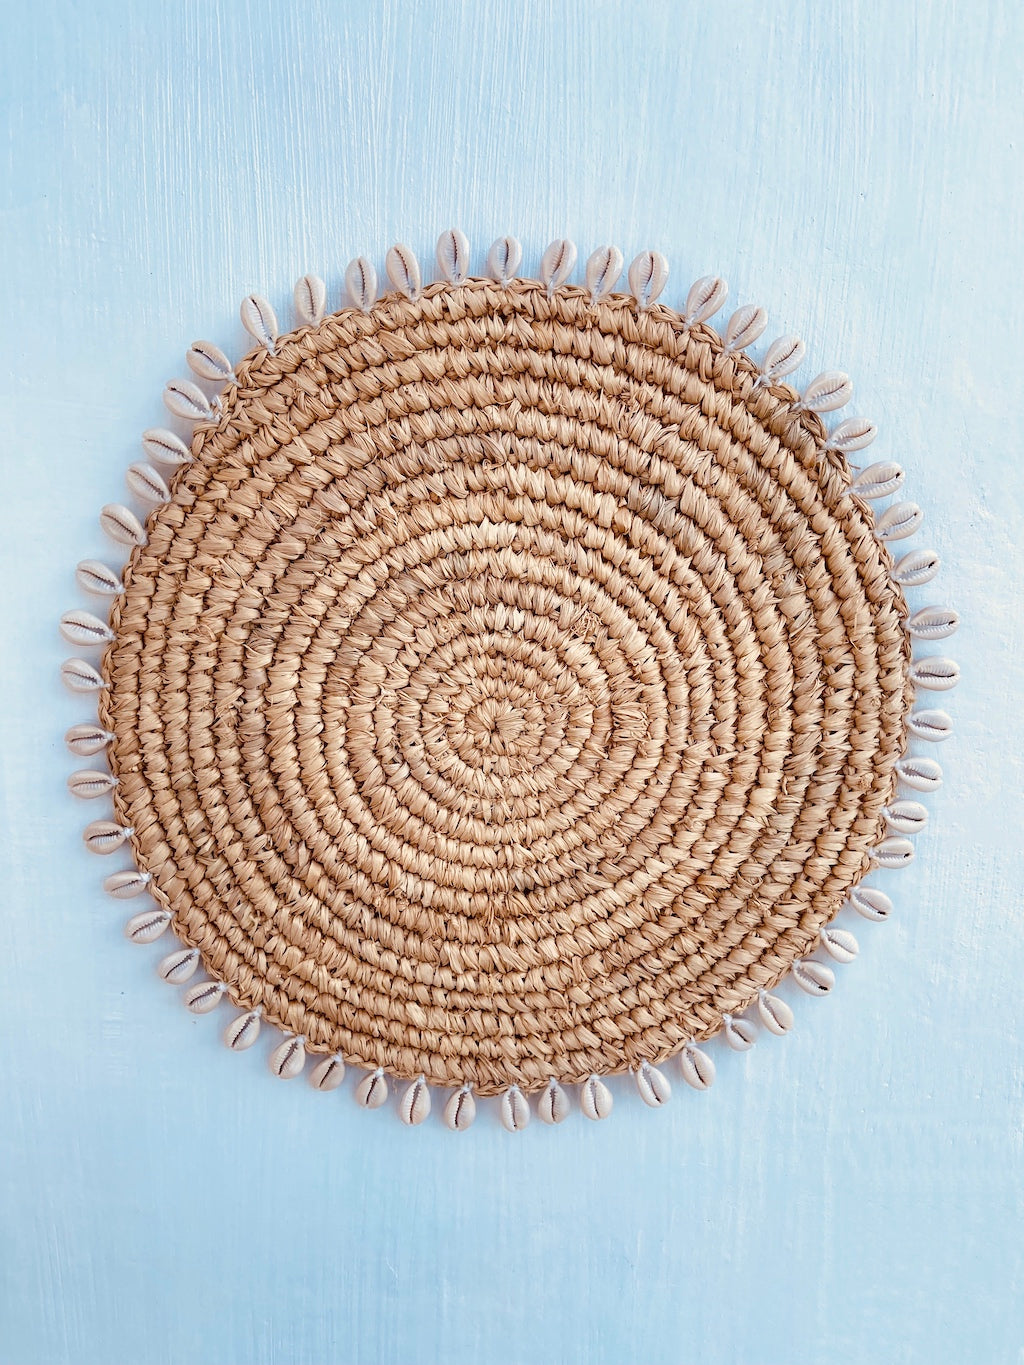 Round raffia placemat decorated with shells